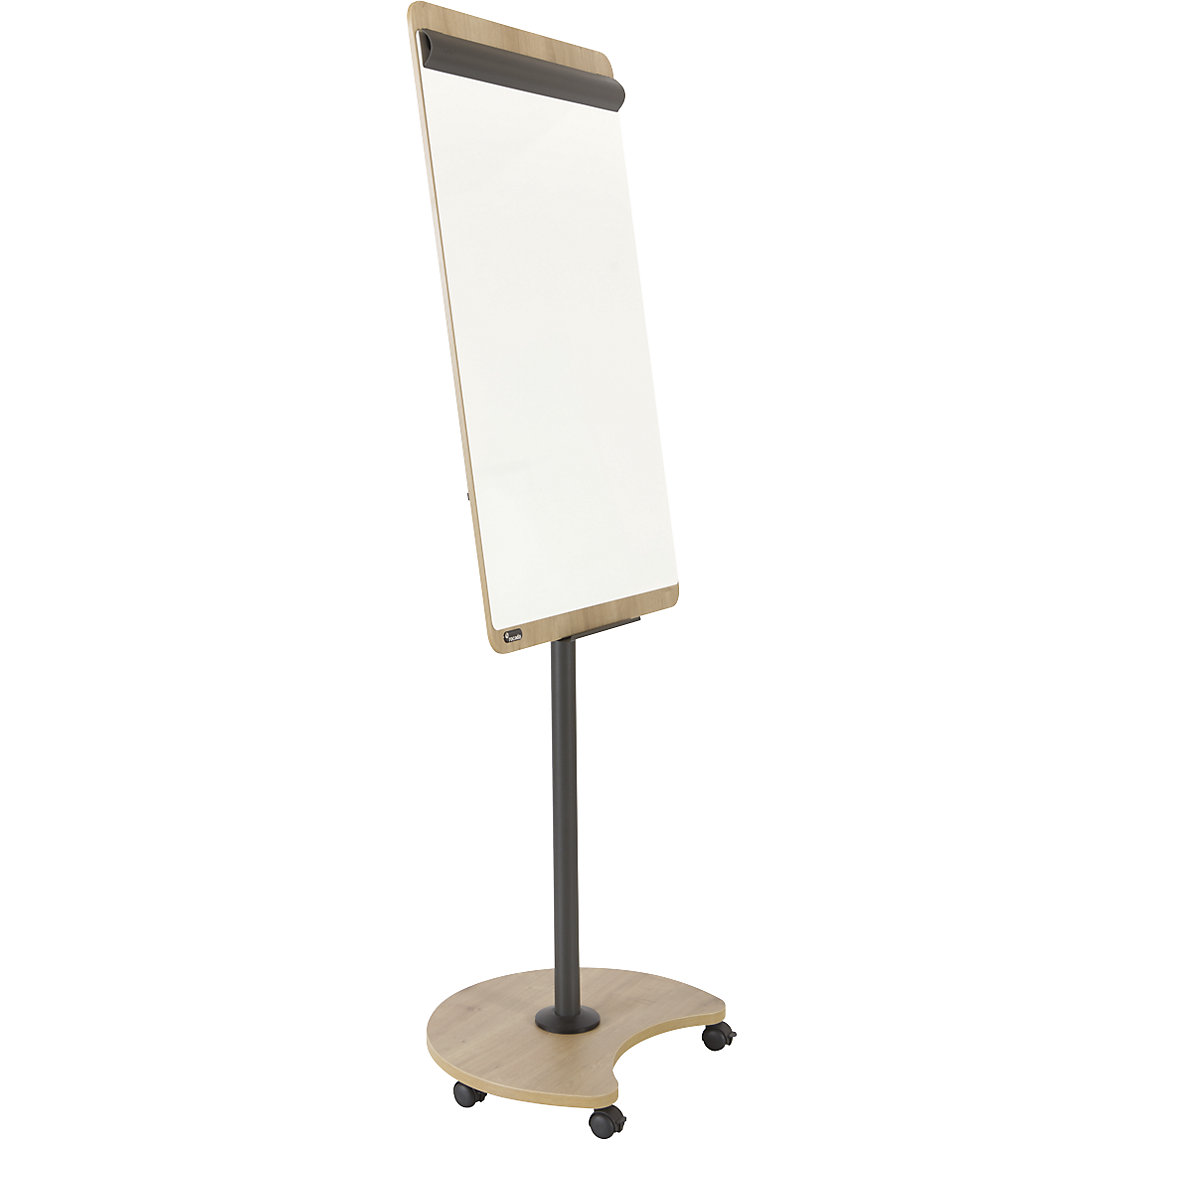 Flip Charts, Stands and Accessories